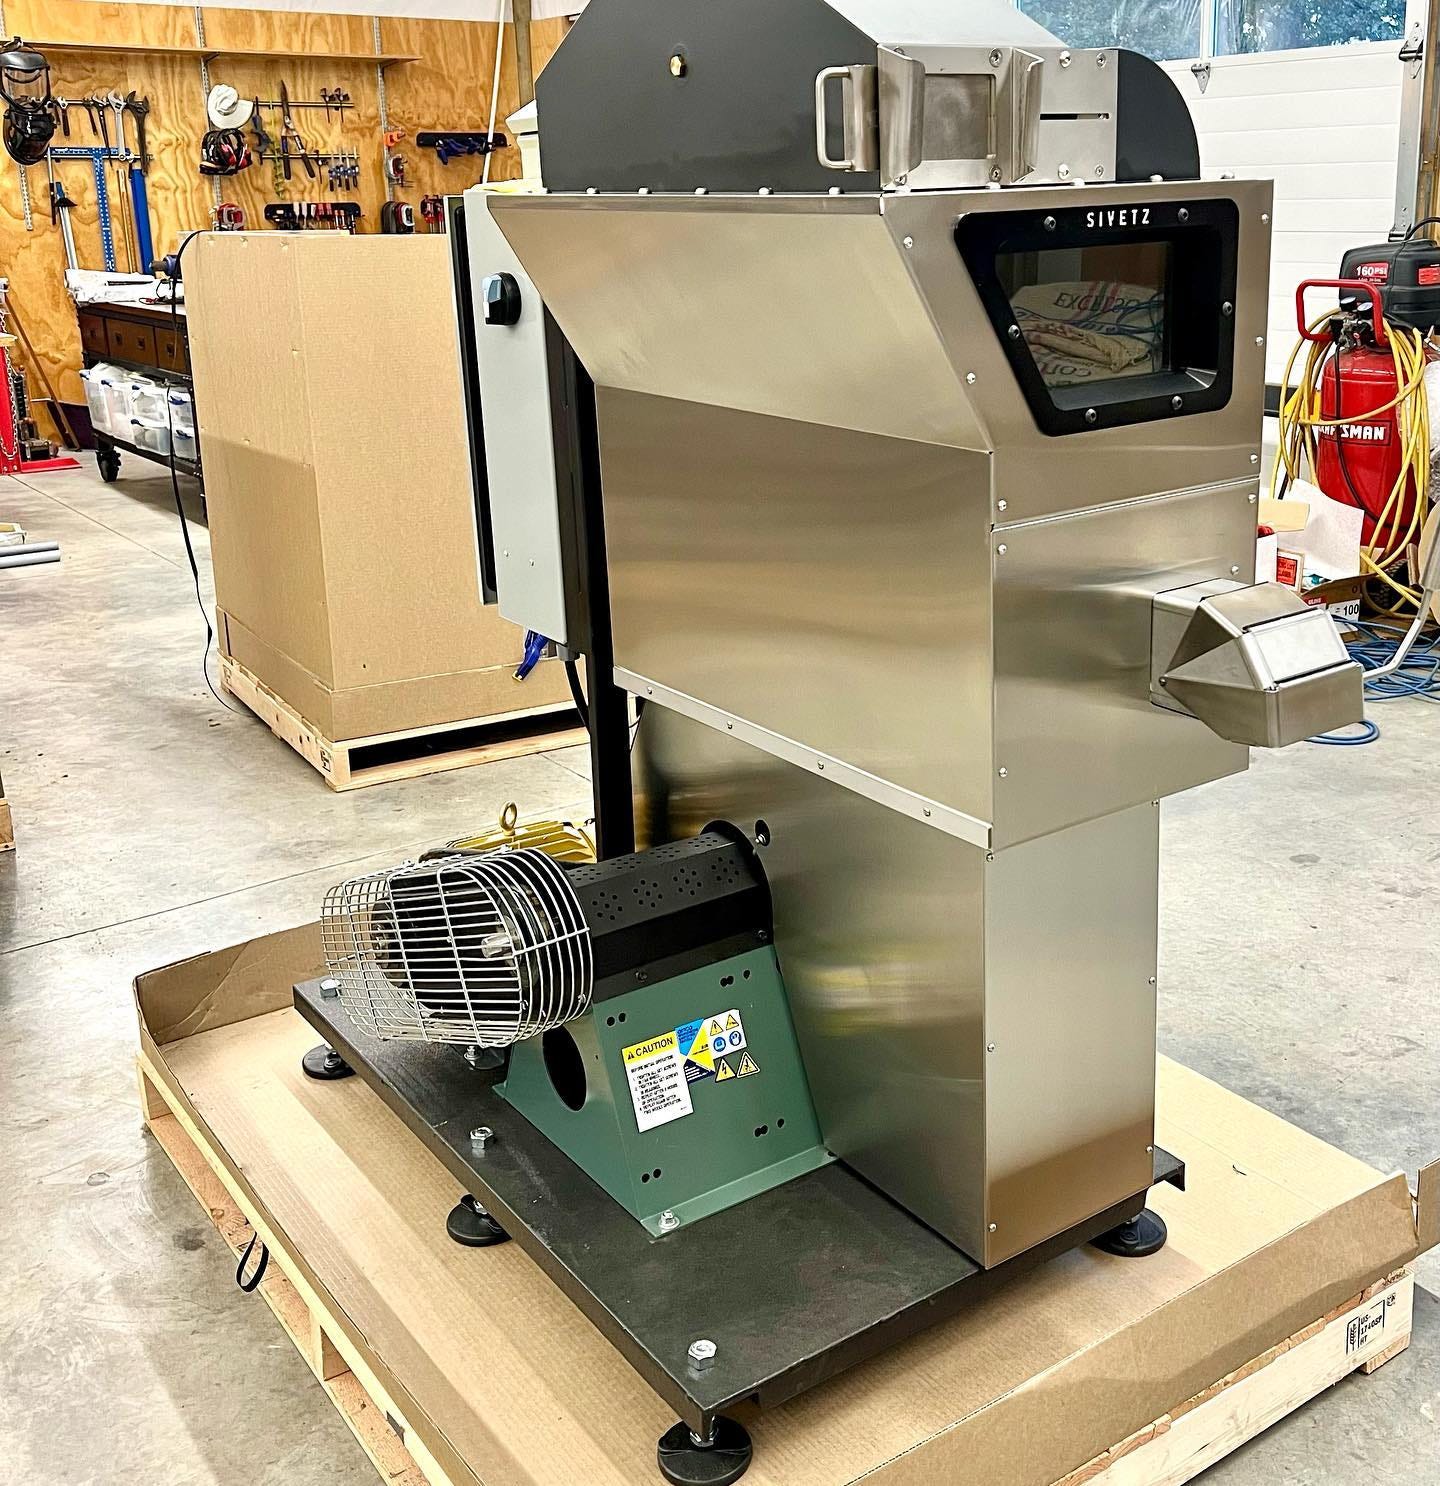 A stainless steel coffee roasting machine. Three rectangular steel boxes are stacked. The top one has an angled side and a window into the machine. A green